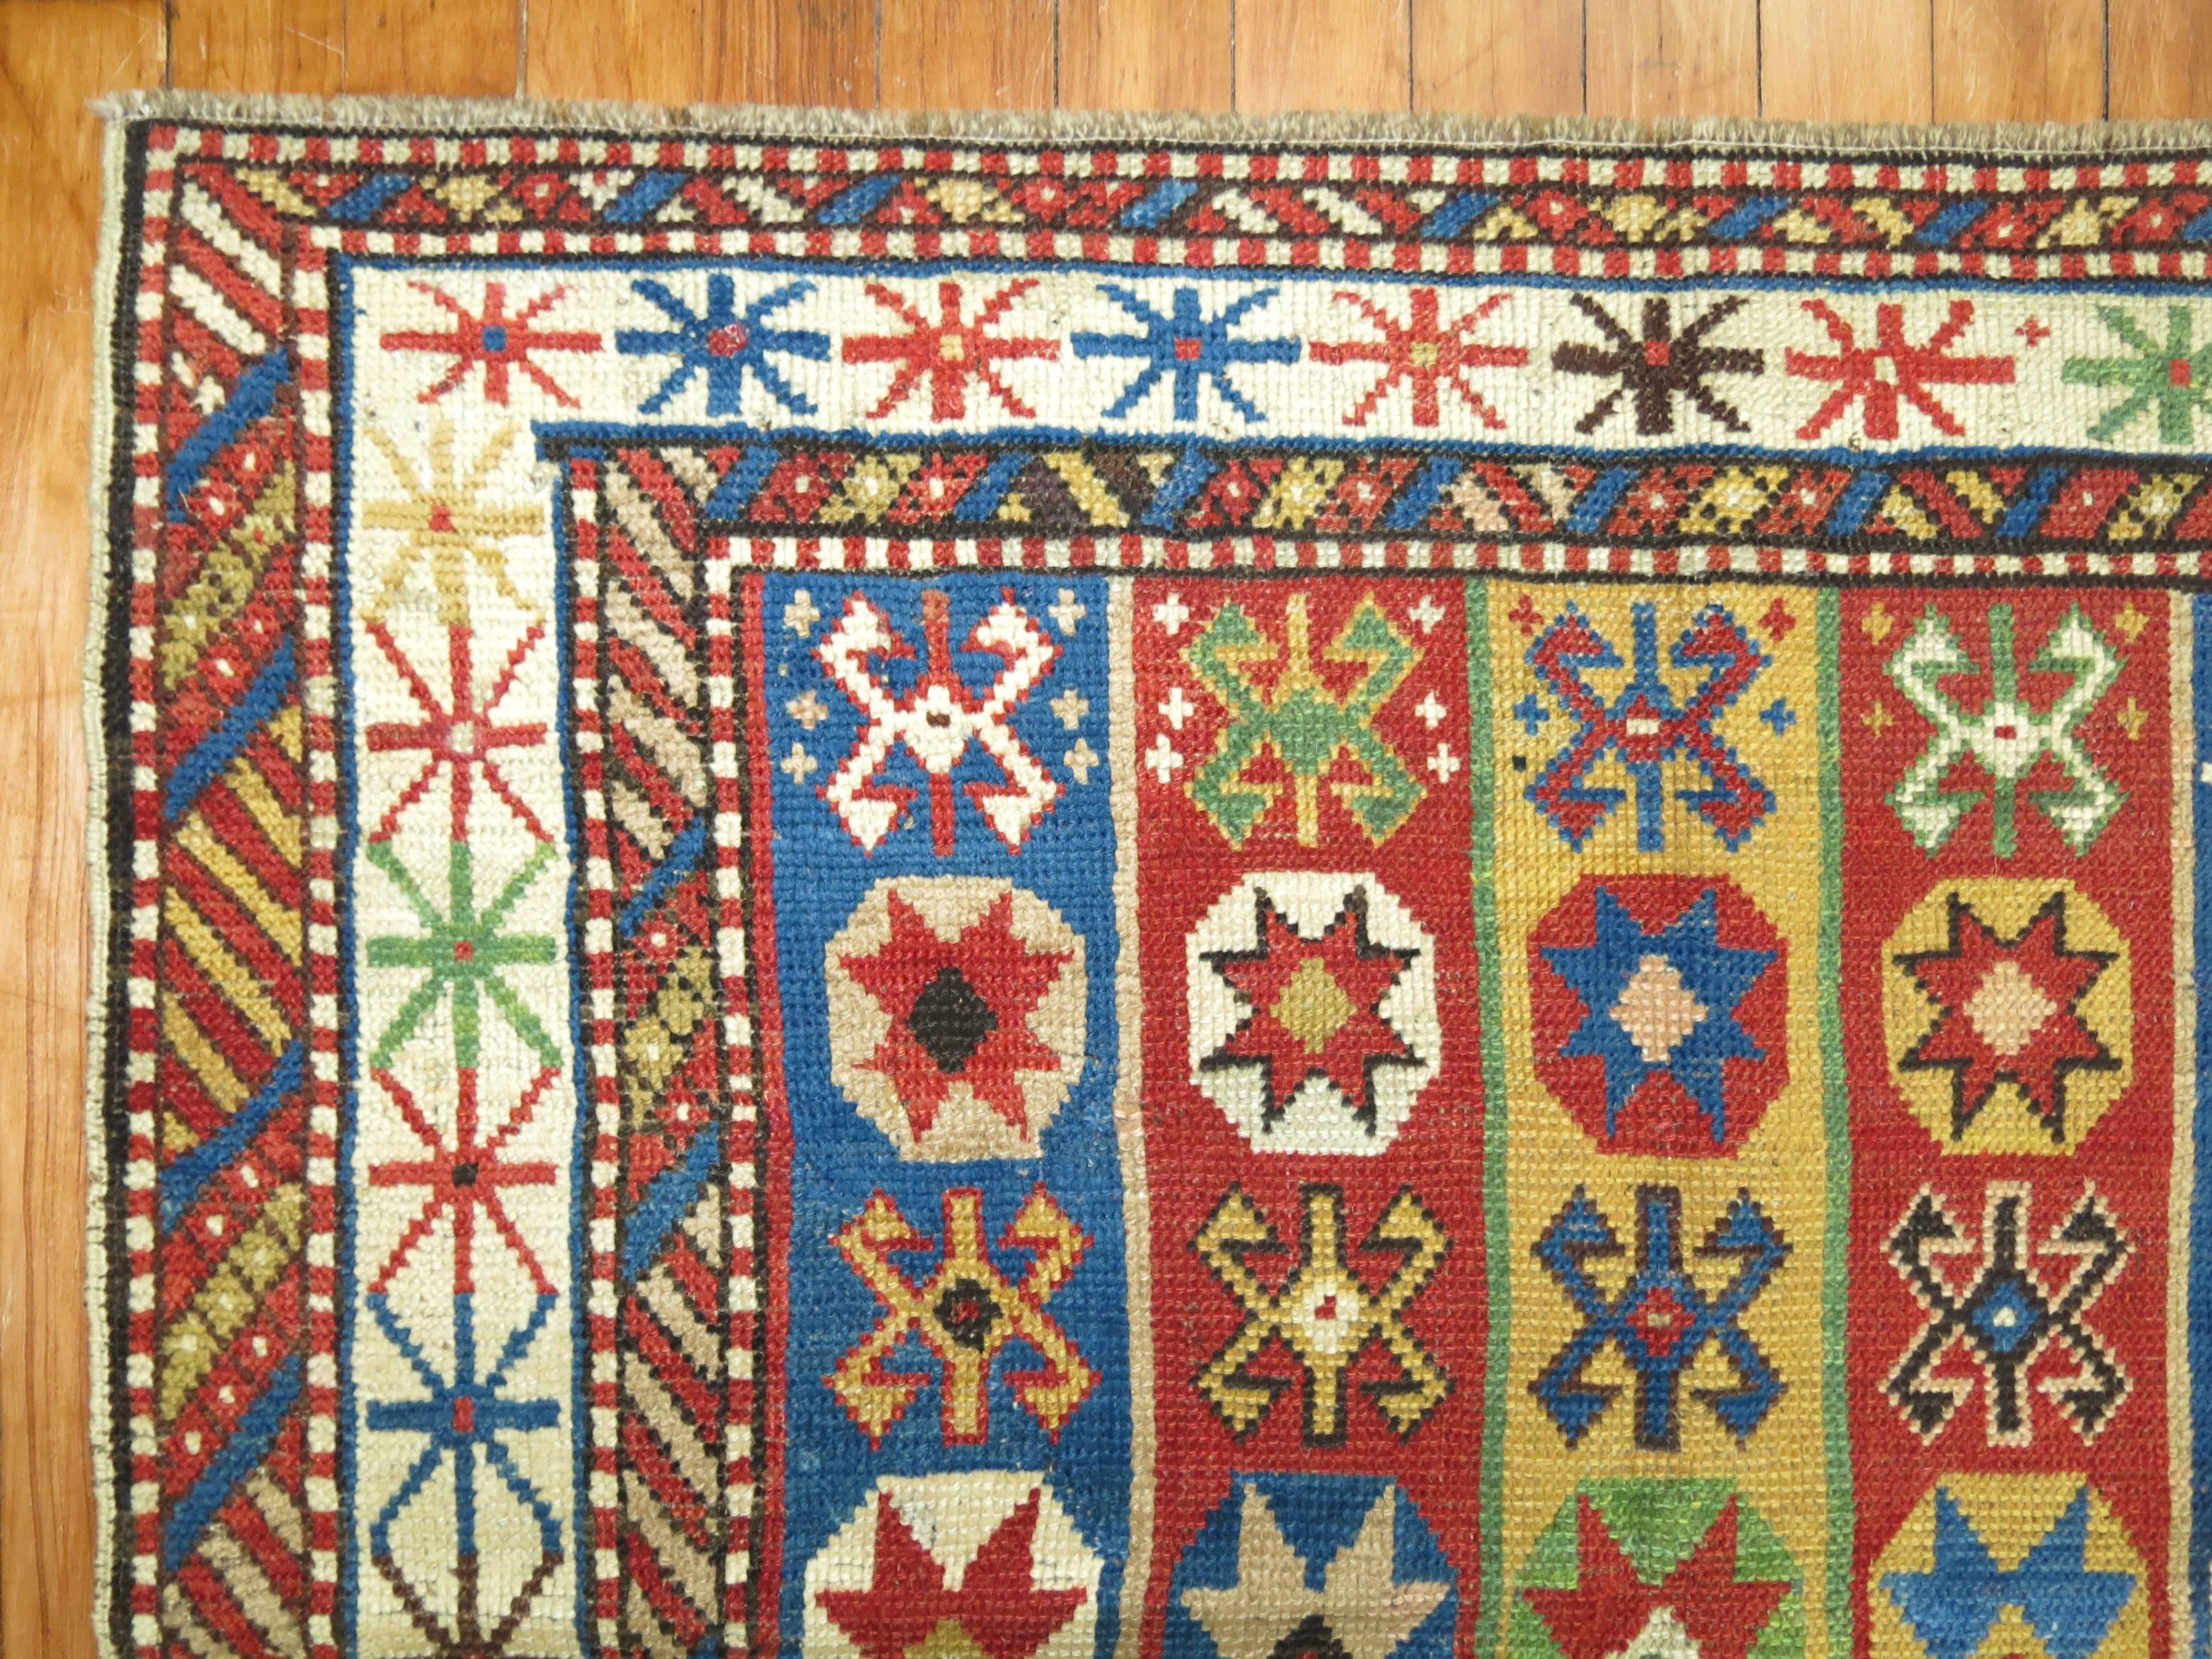 Hand-Woven Whimsical Early 20th Century Decorative Antique Caucasian Tribal Rug